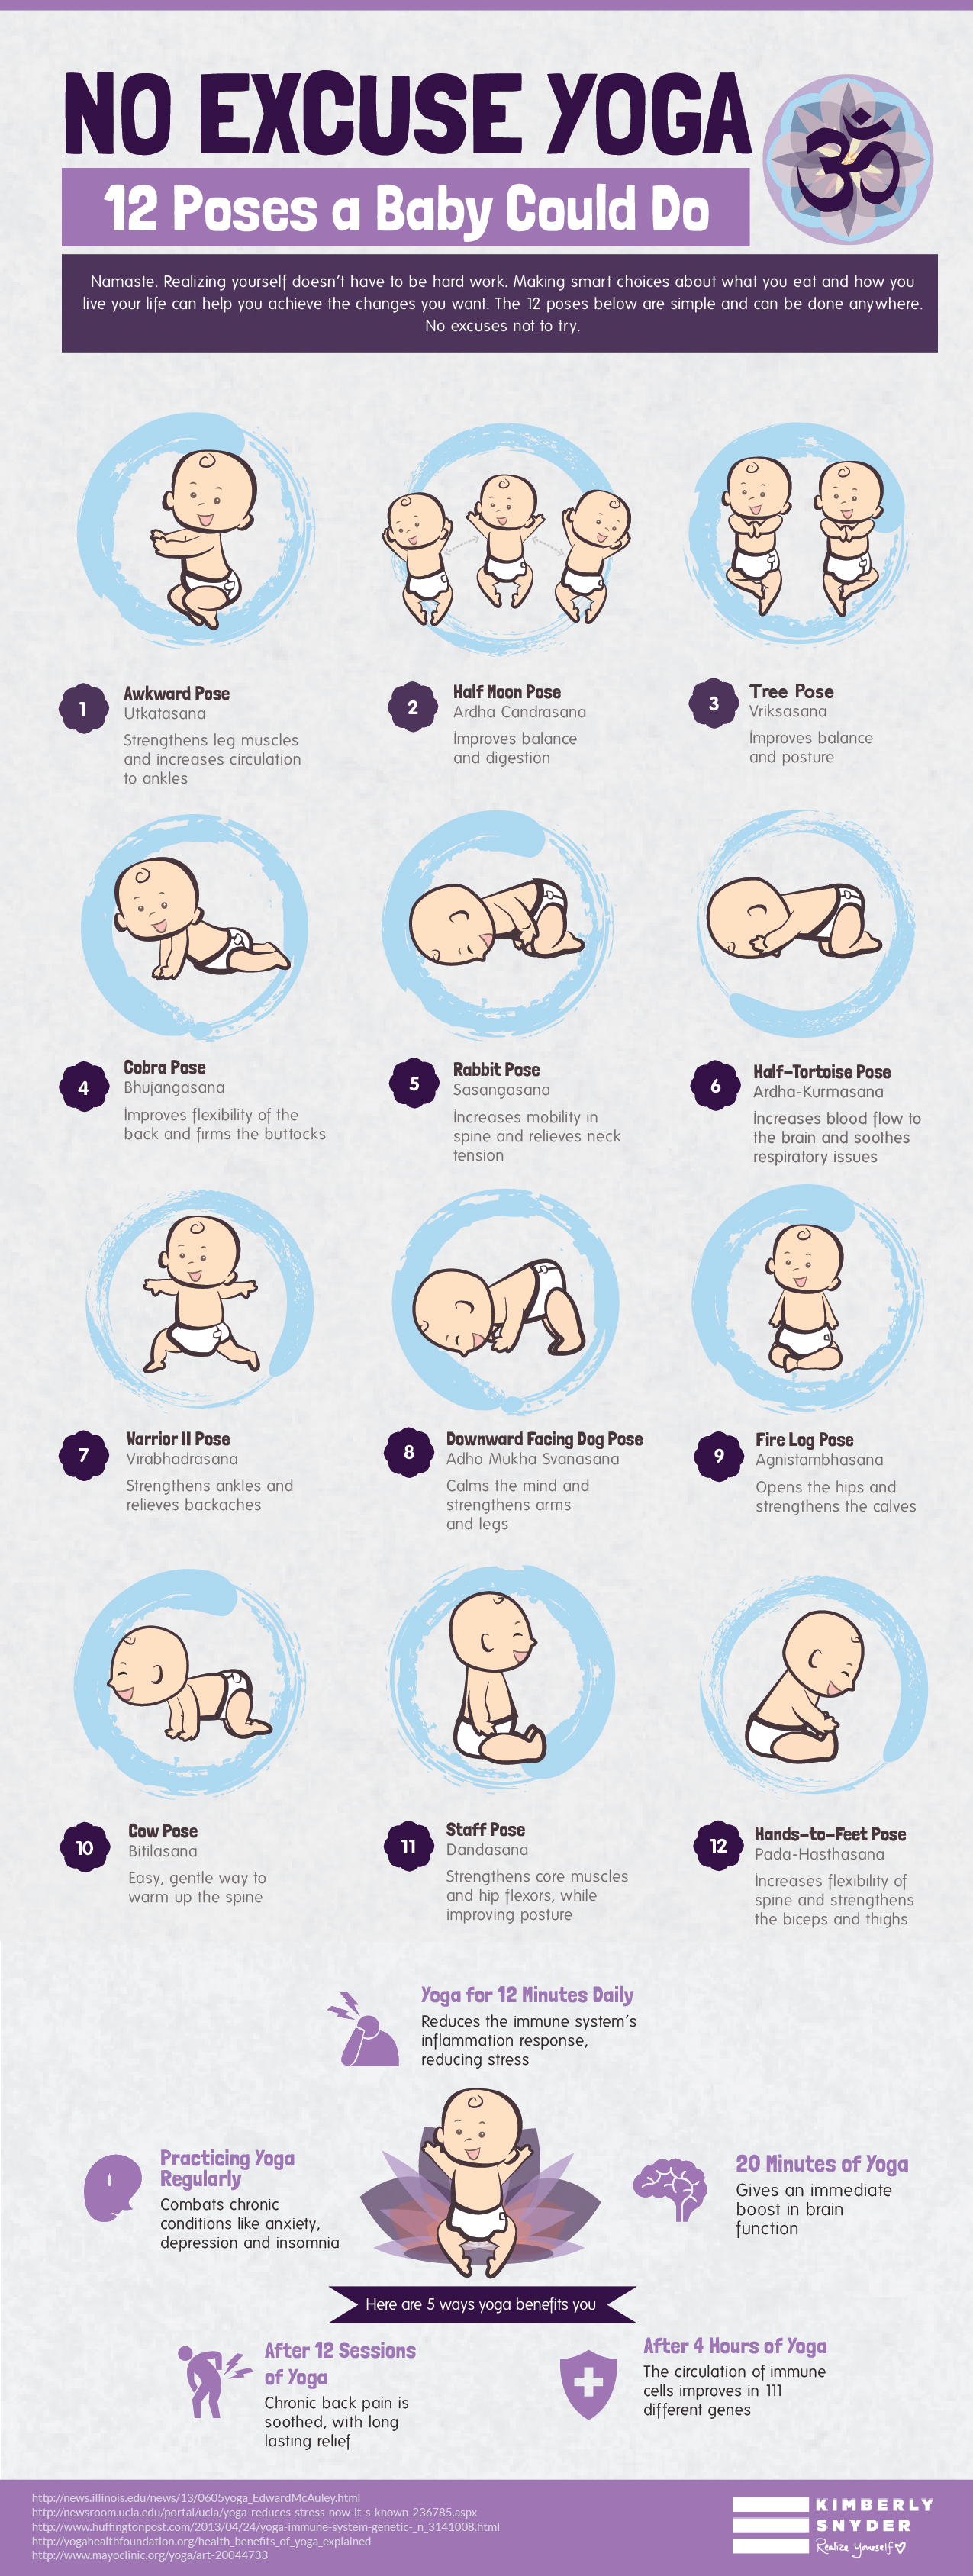 No Excuse Yoga – 12 Poses A Baby Could Do